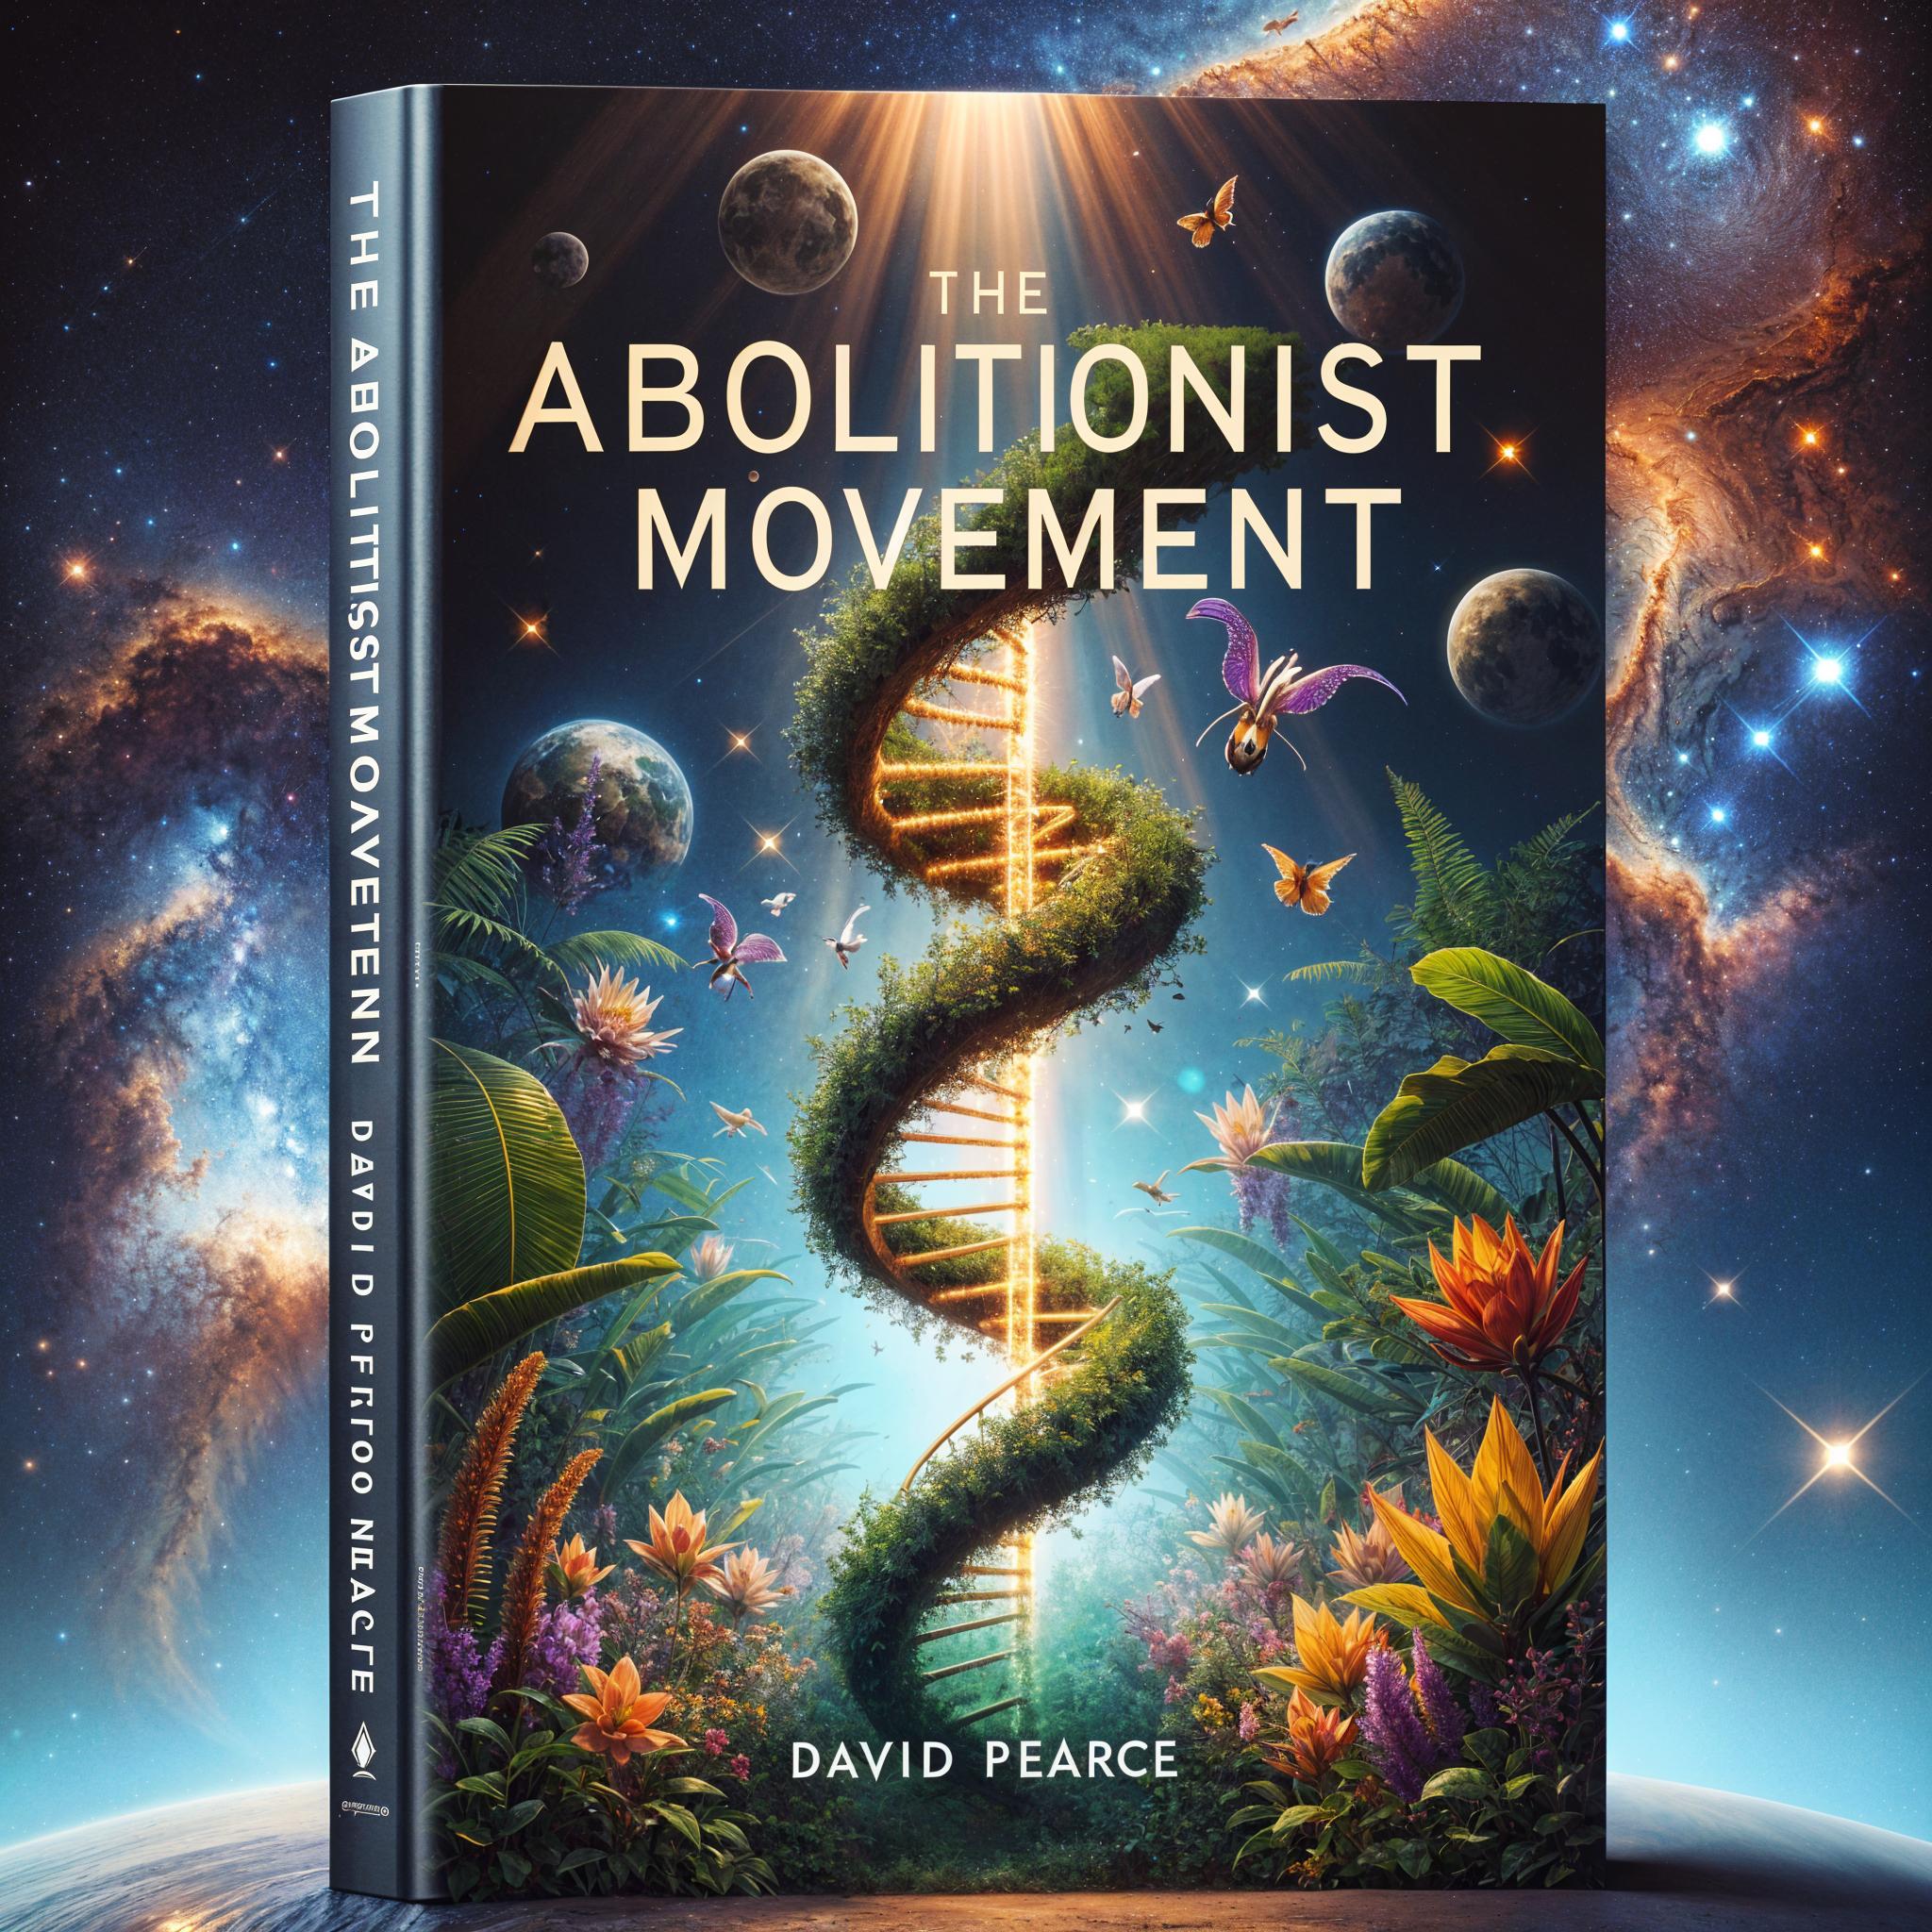 The Abolitionist Movement by David Pearce